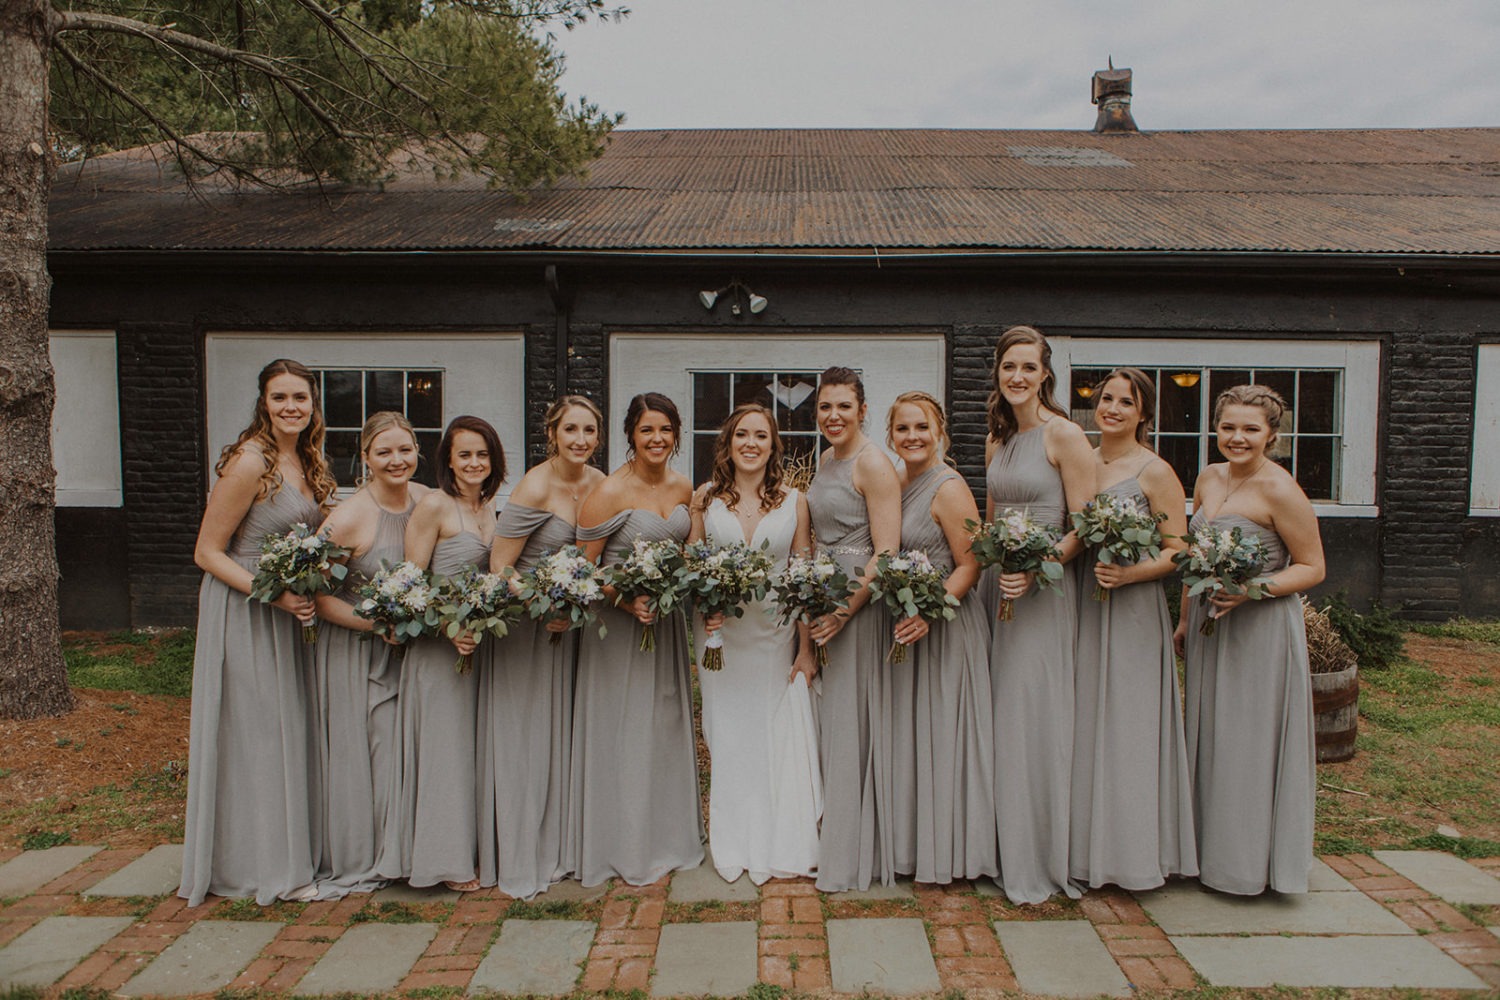 Bridesmaids stand with bride in a row holding wedding bouquets